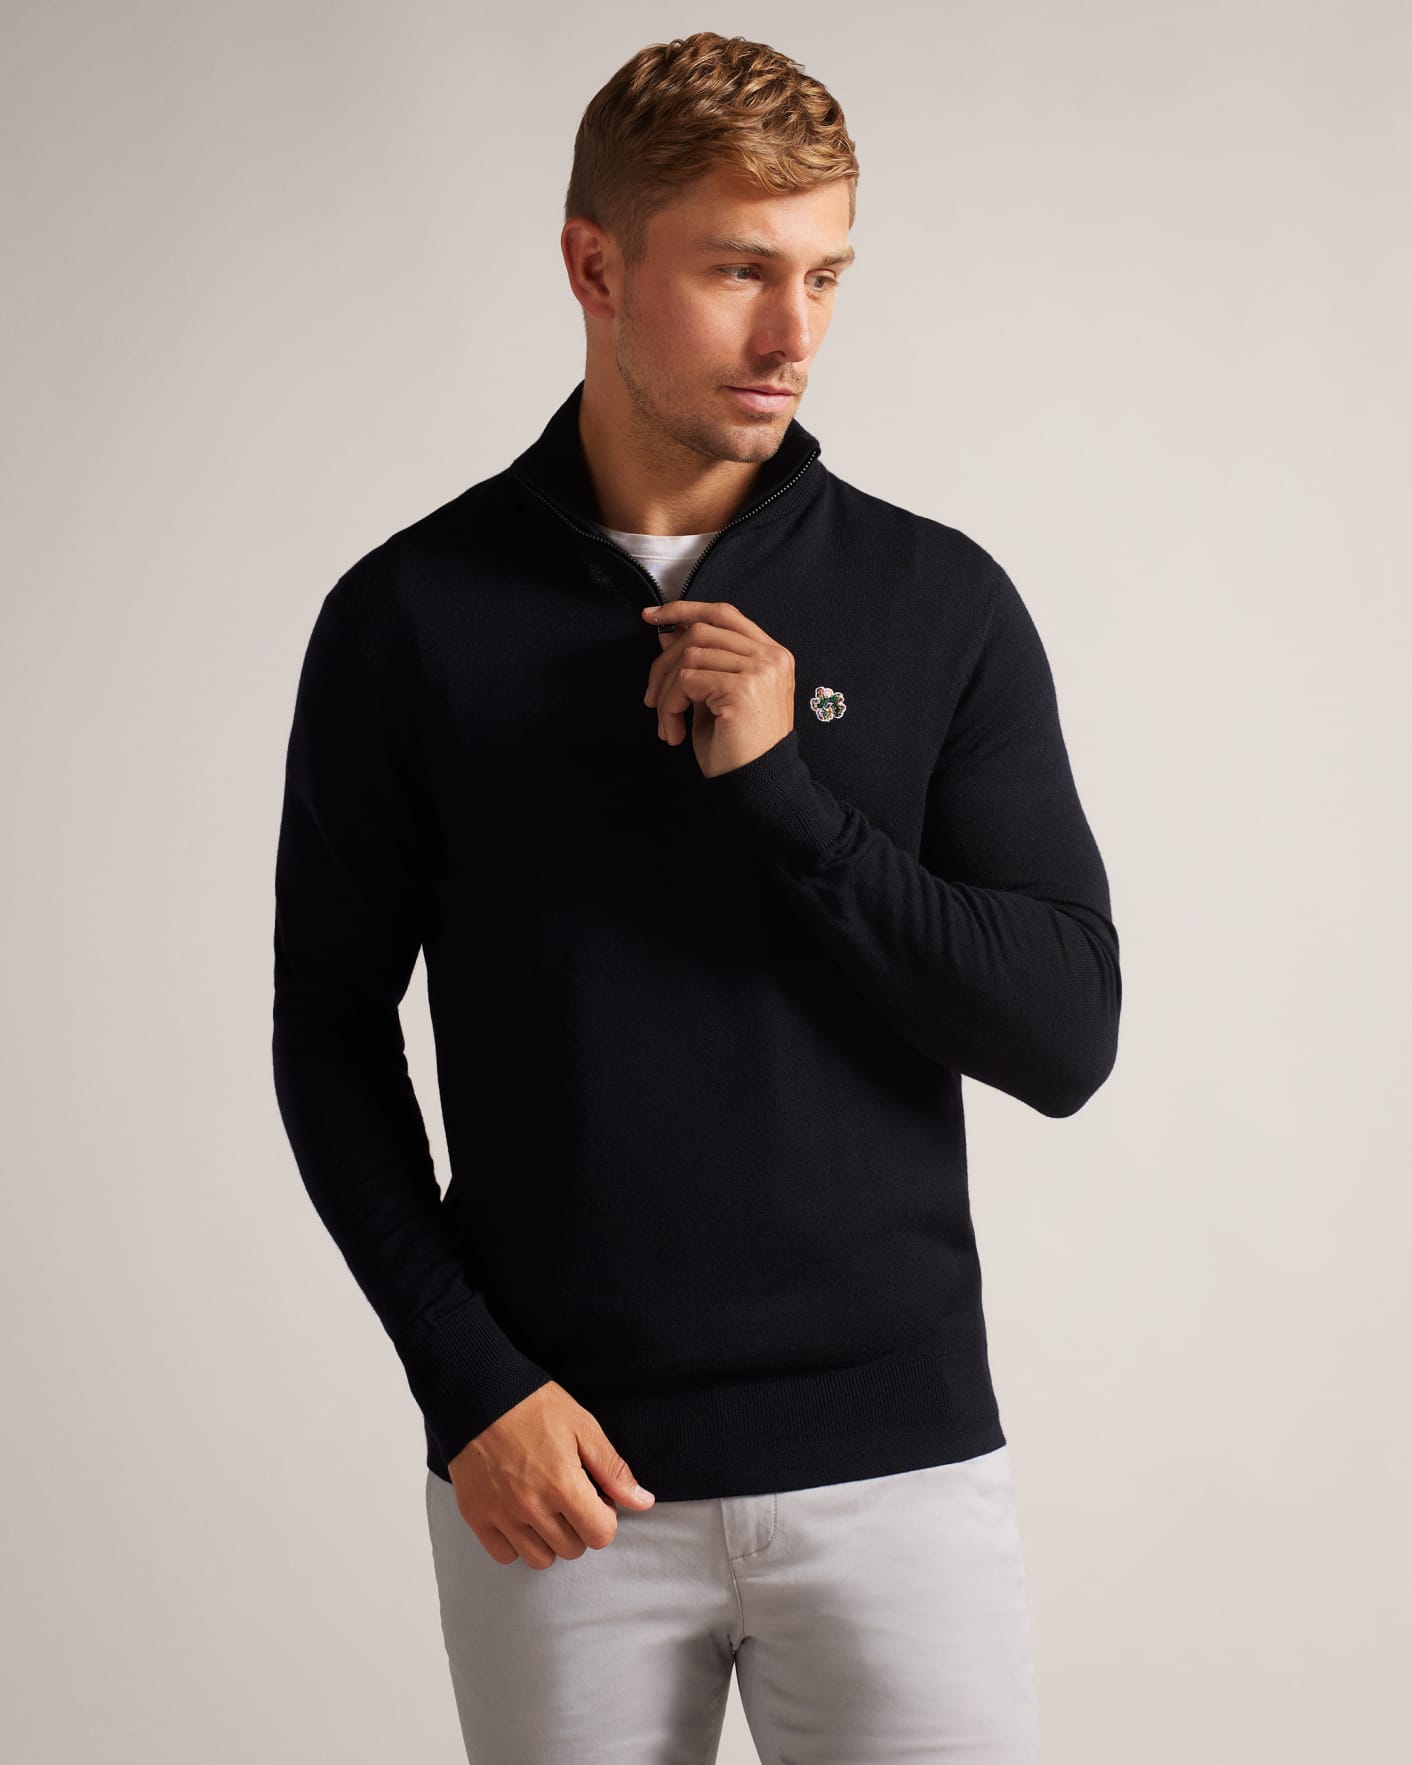 for Men Ted Baker Wool Mmk-tooting-ls Core Half Zip Pullover Sweater in Charcoal Grey Mens Clothing Sweaters and knitwear Zipped sweaters 